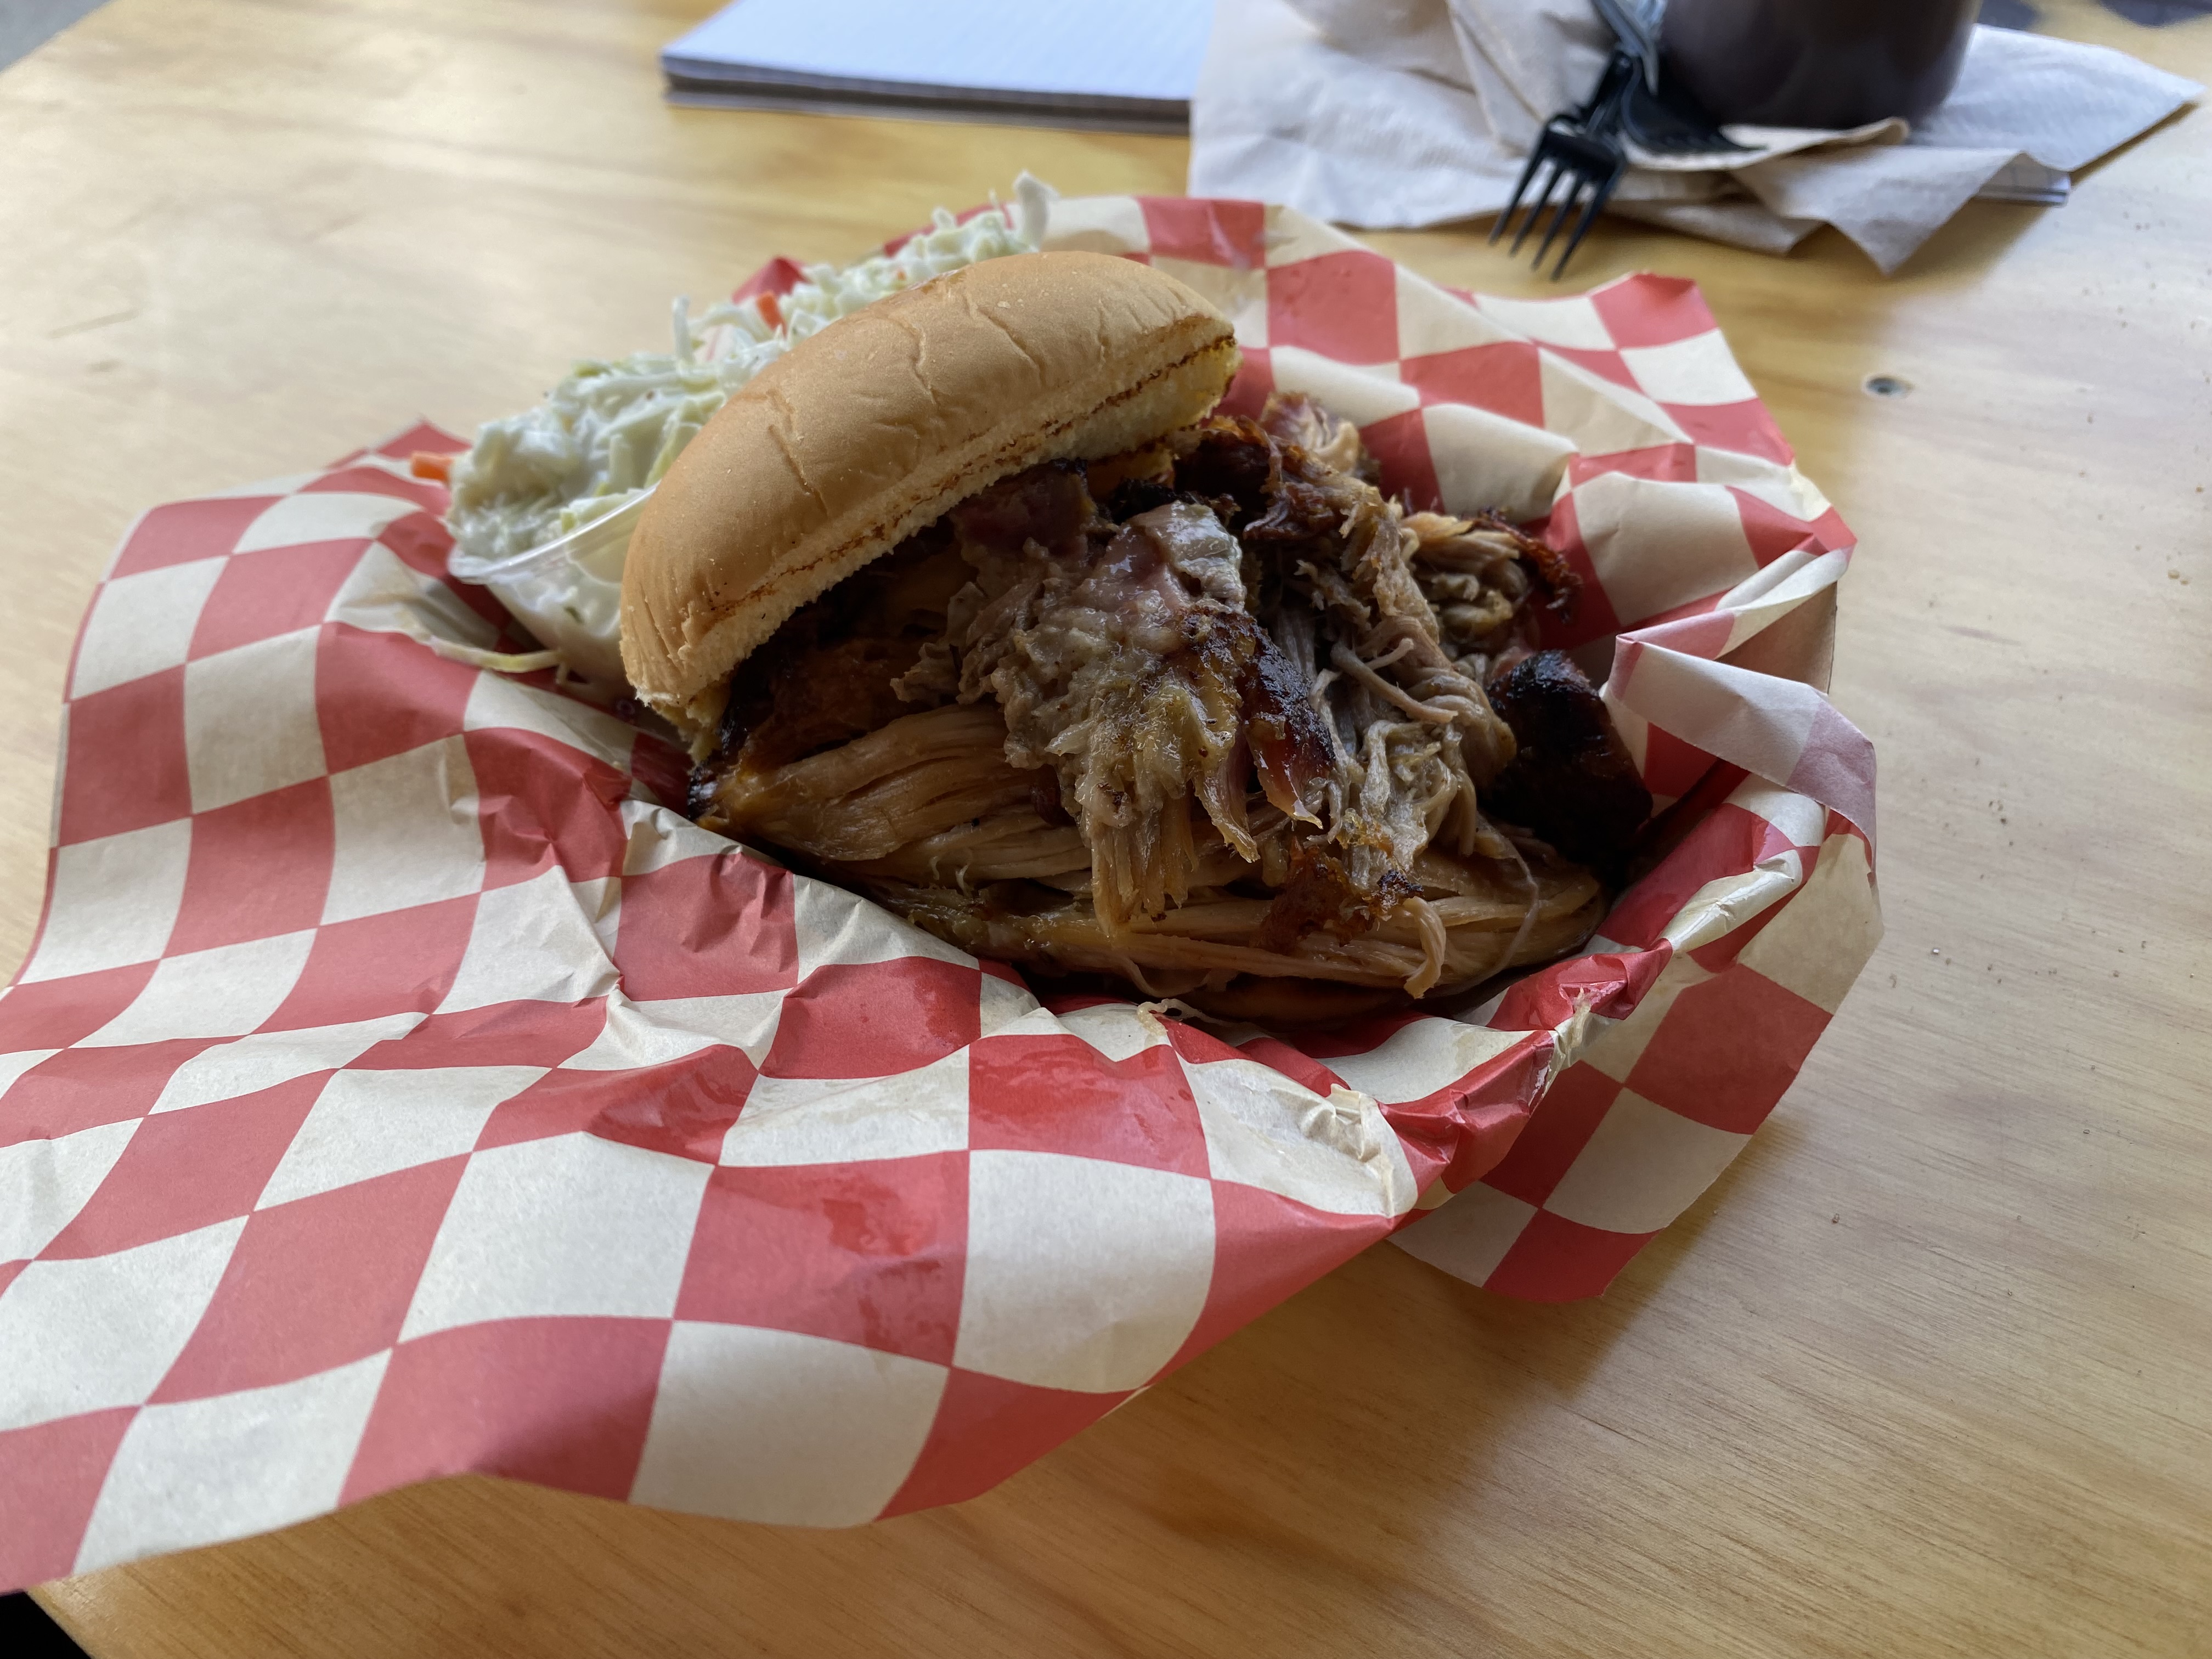 The pulled pork sandwich at 1911 at the New York State Fair. 1911 is serving food at the Fair for the first time this year.
Photo by Mike Waters | mwaters@syracuse.com